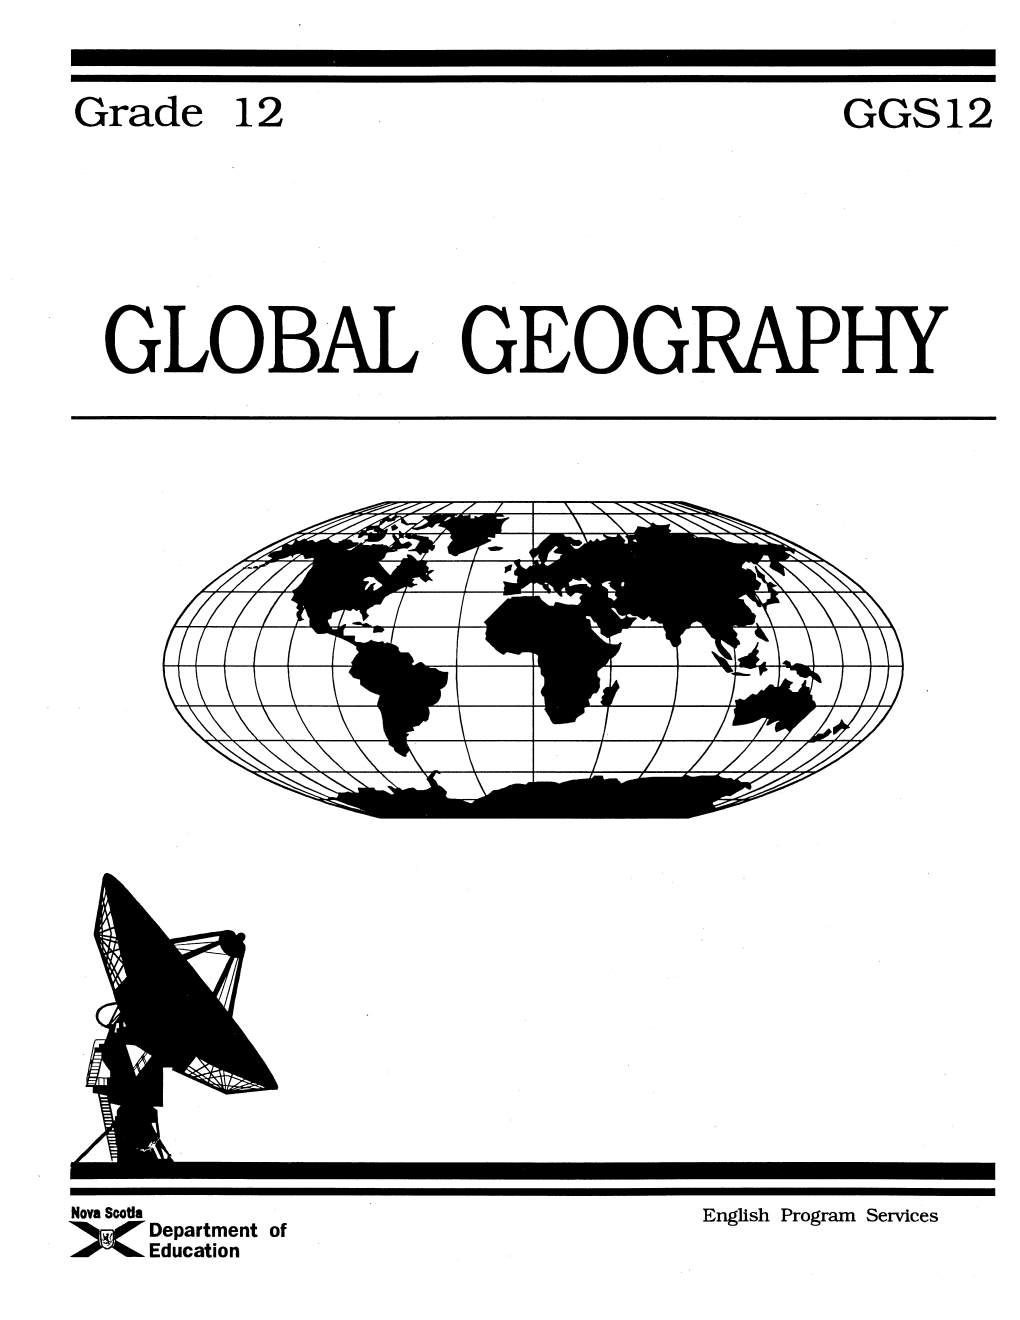 Teaching/Learning Activities for Global Geography